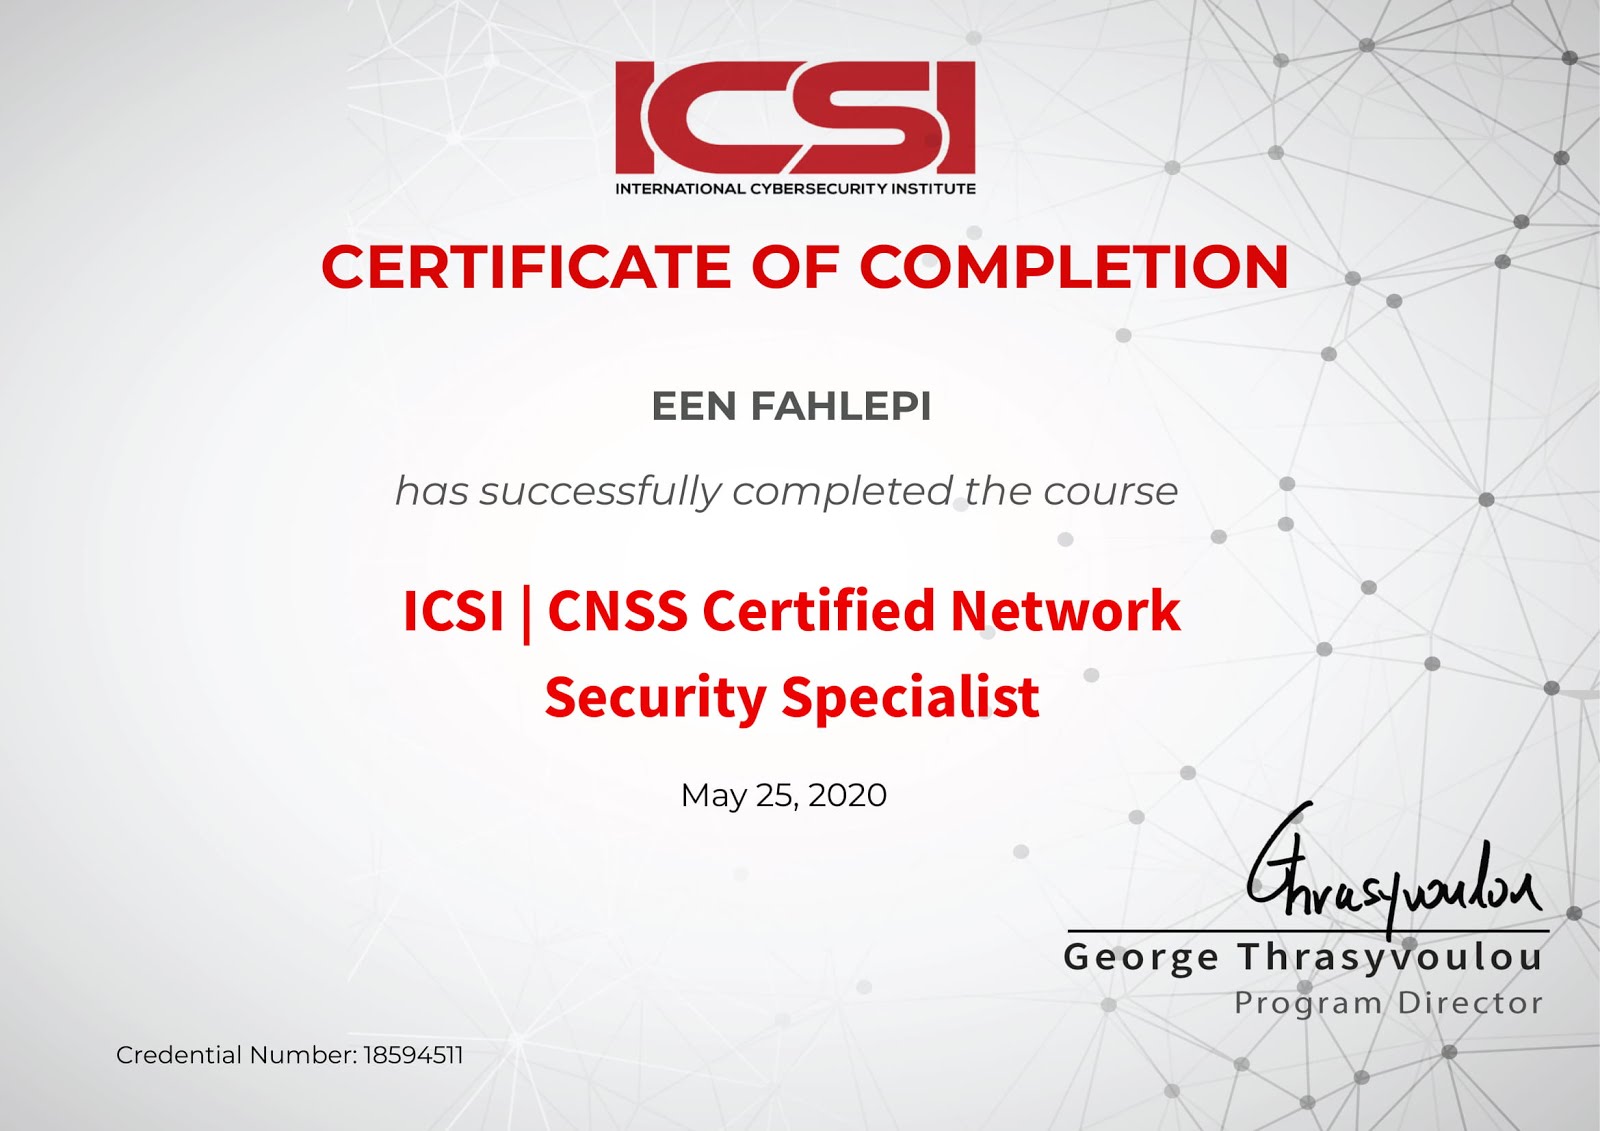 ICSI | CNSS Certified Network Security Specialist